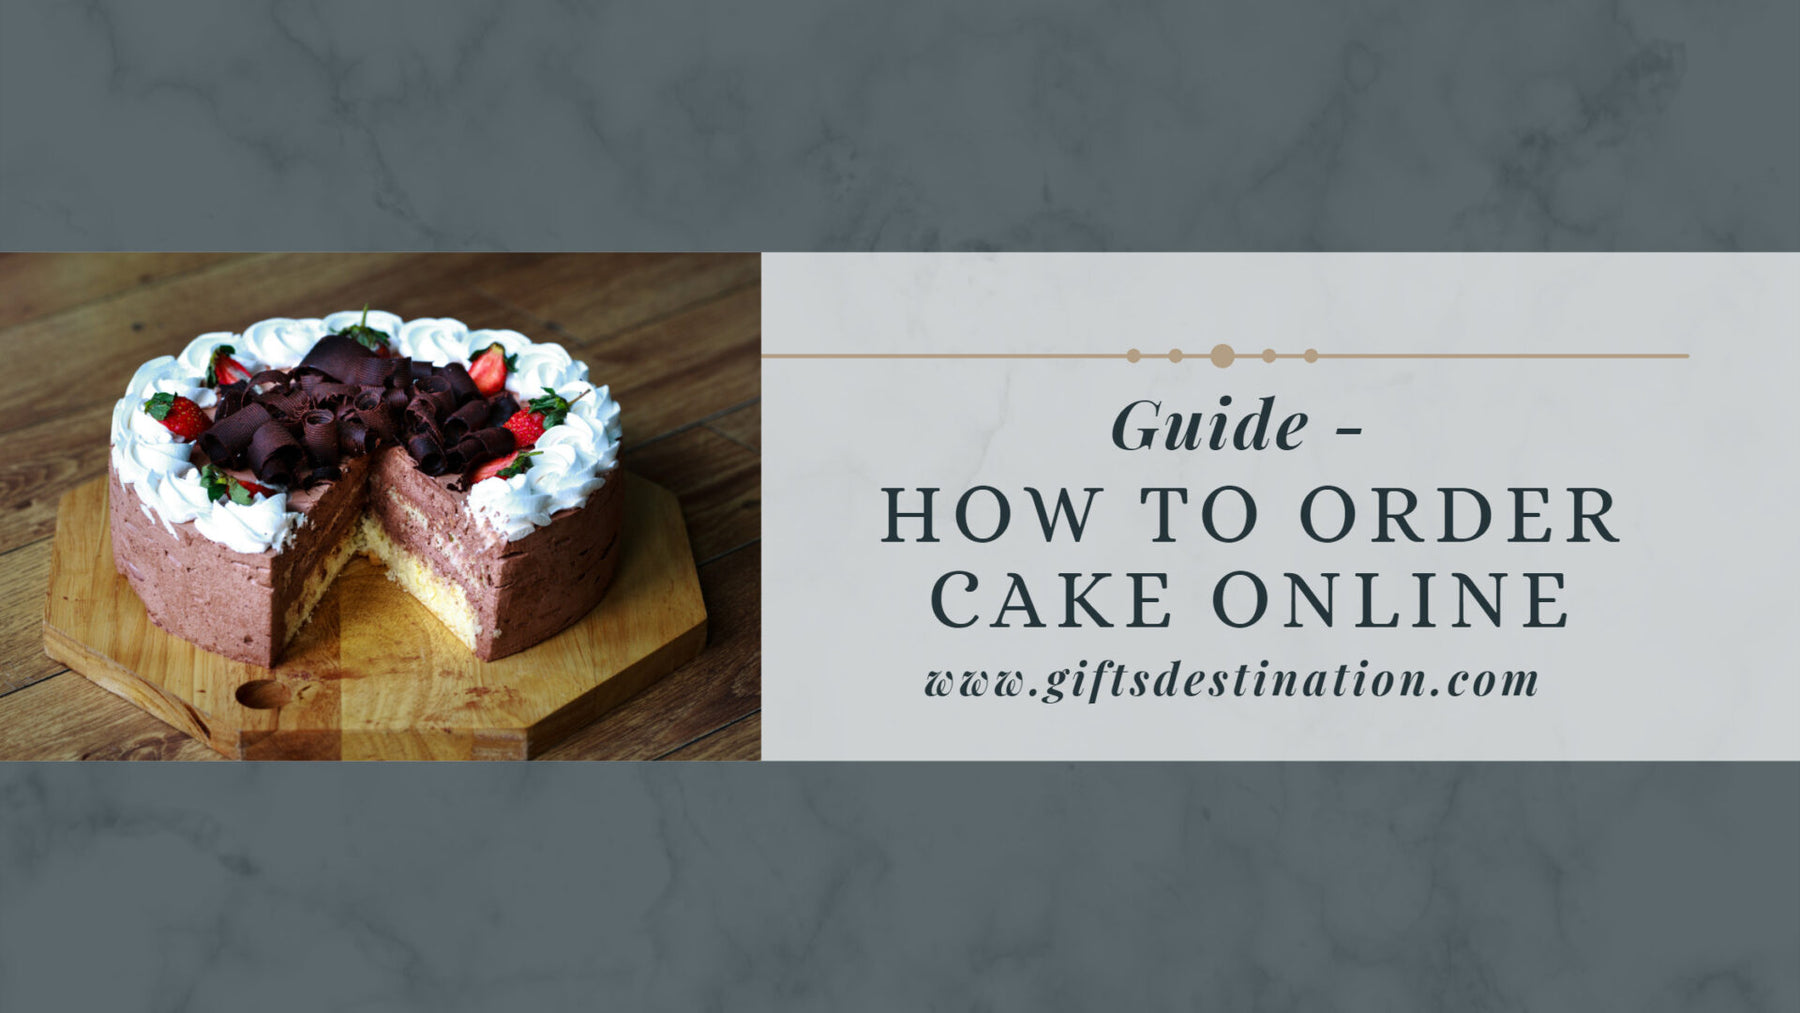 Guide: How to Order Cake Online